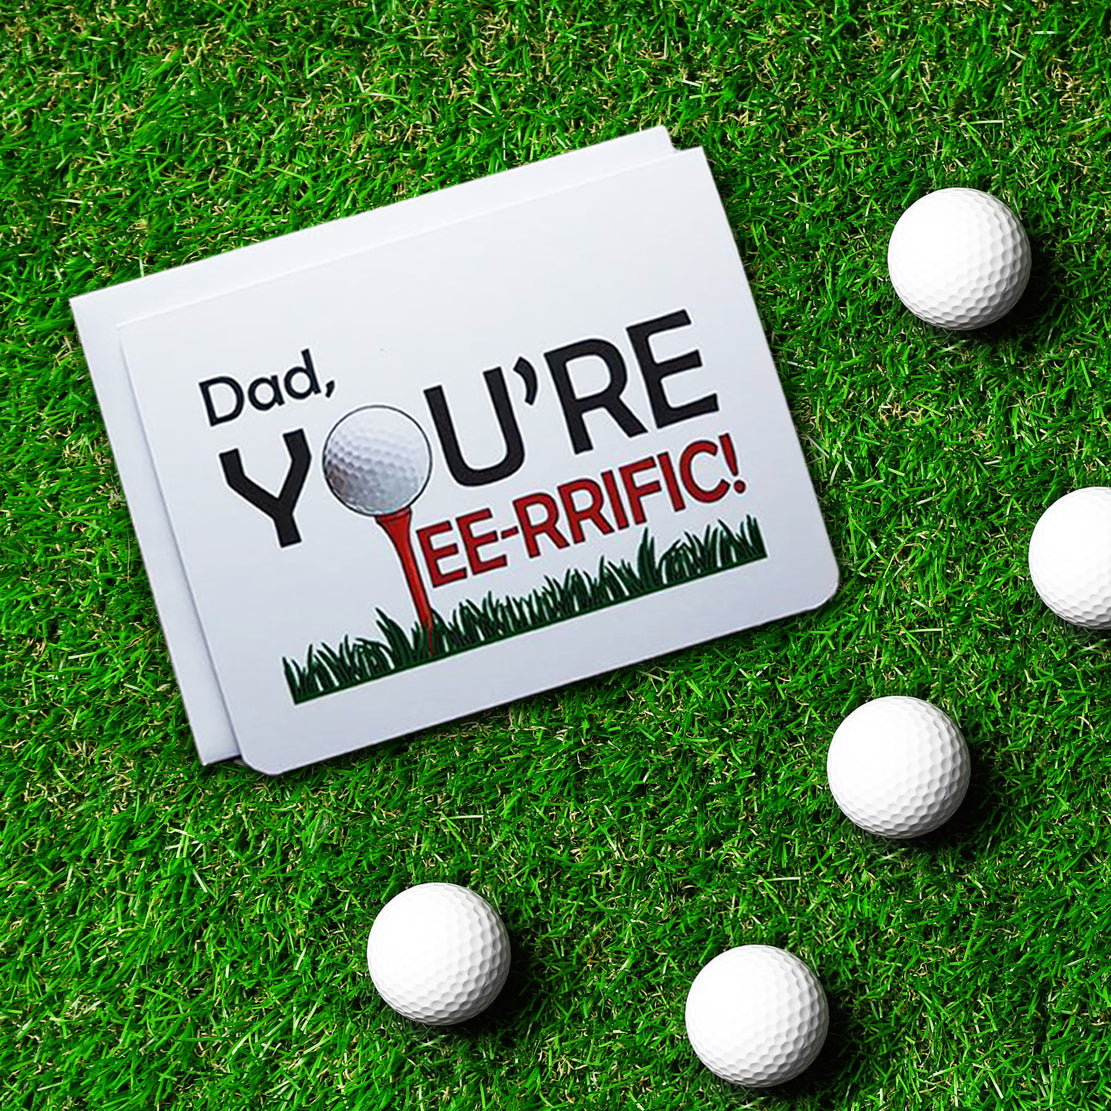 A fathers day card. It has reads, Dad, You're Teerrific. The 'O' of 'You're' is a golf ball on a tee.